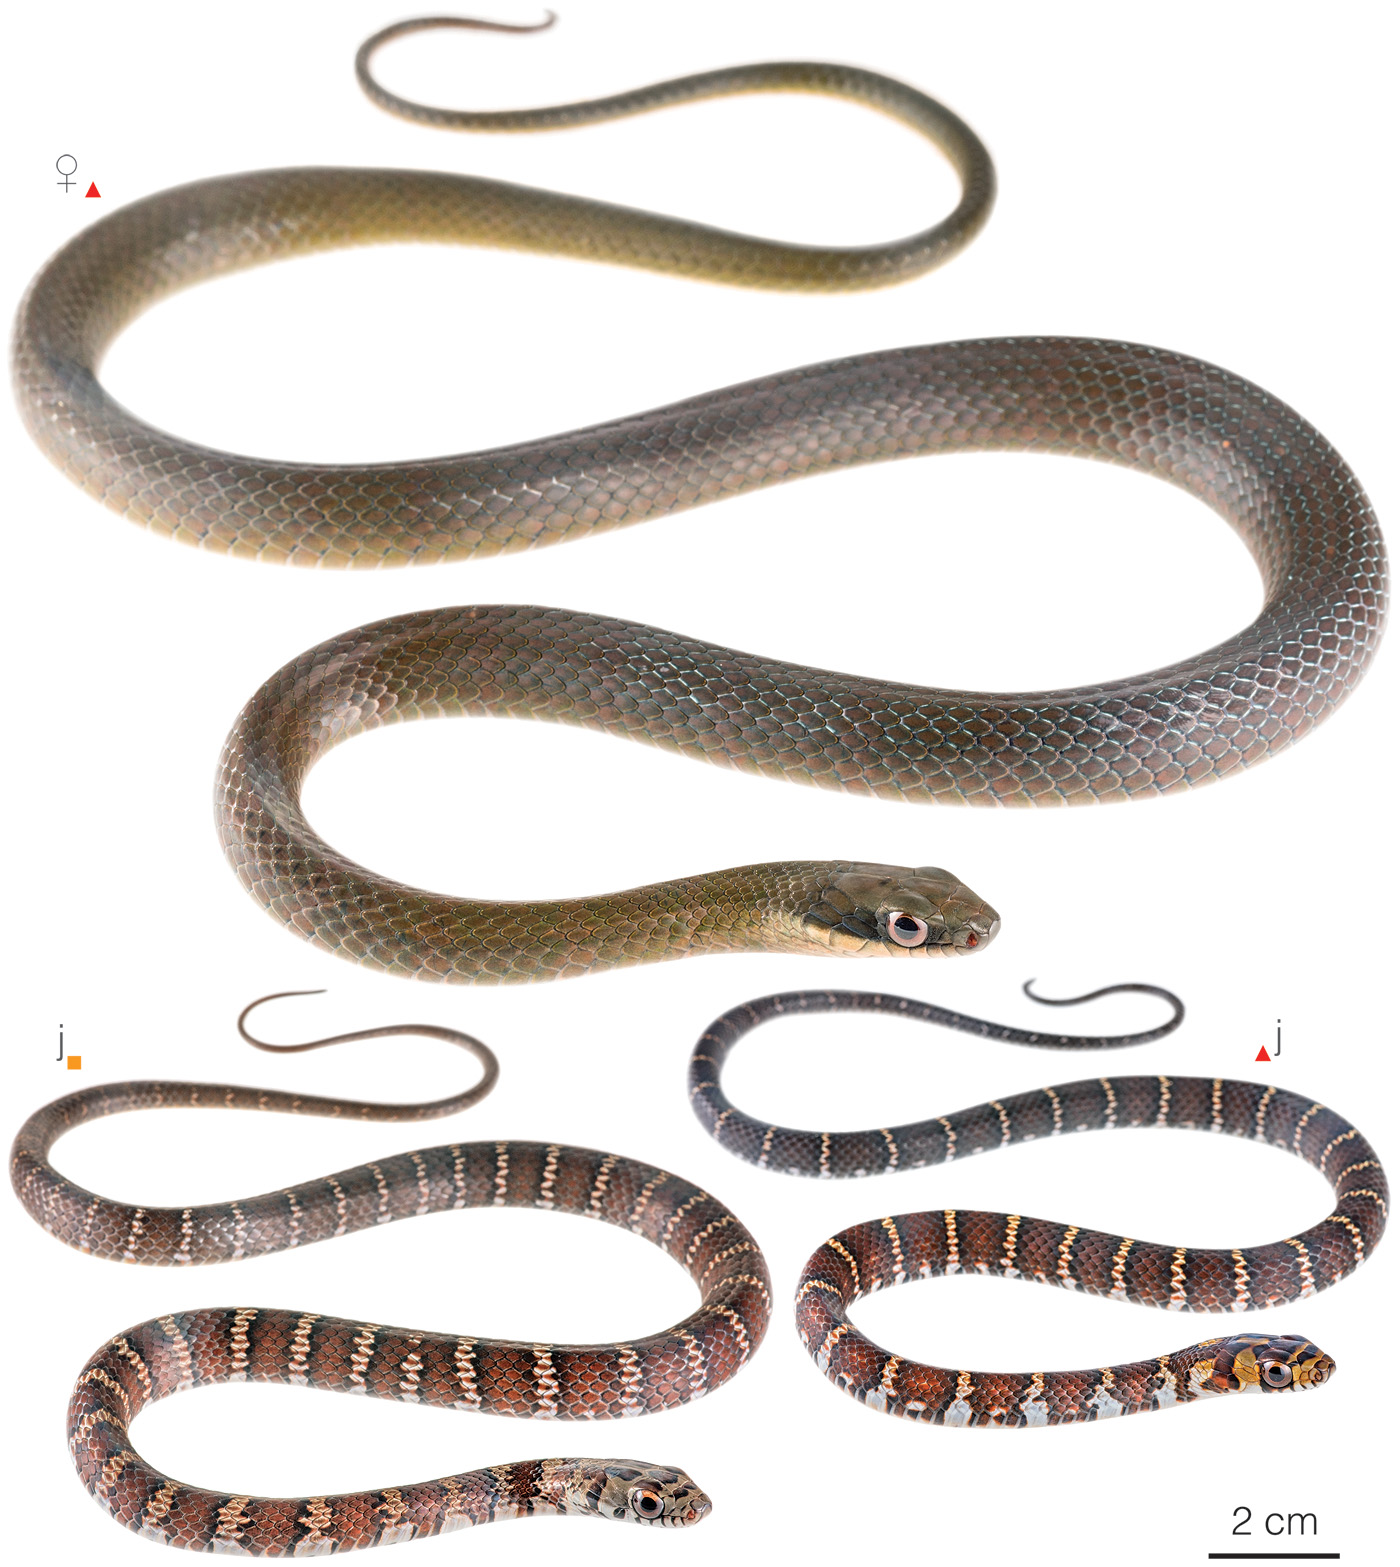 Figure showing variation among individuals of Drymoluber dichrous